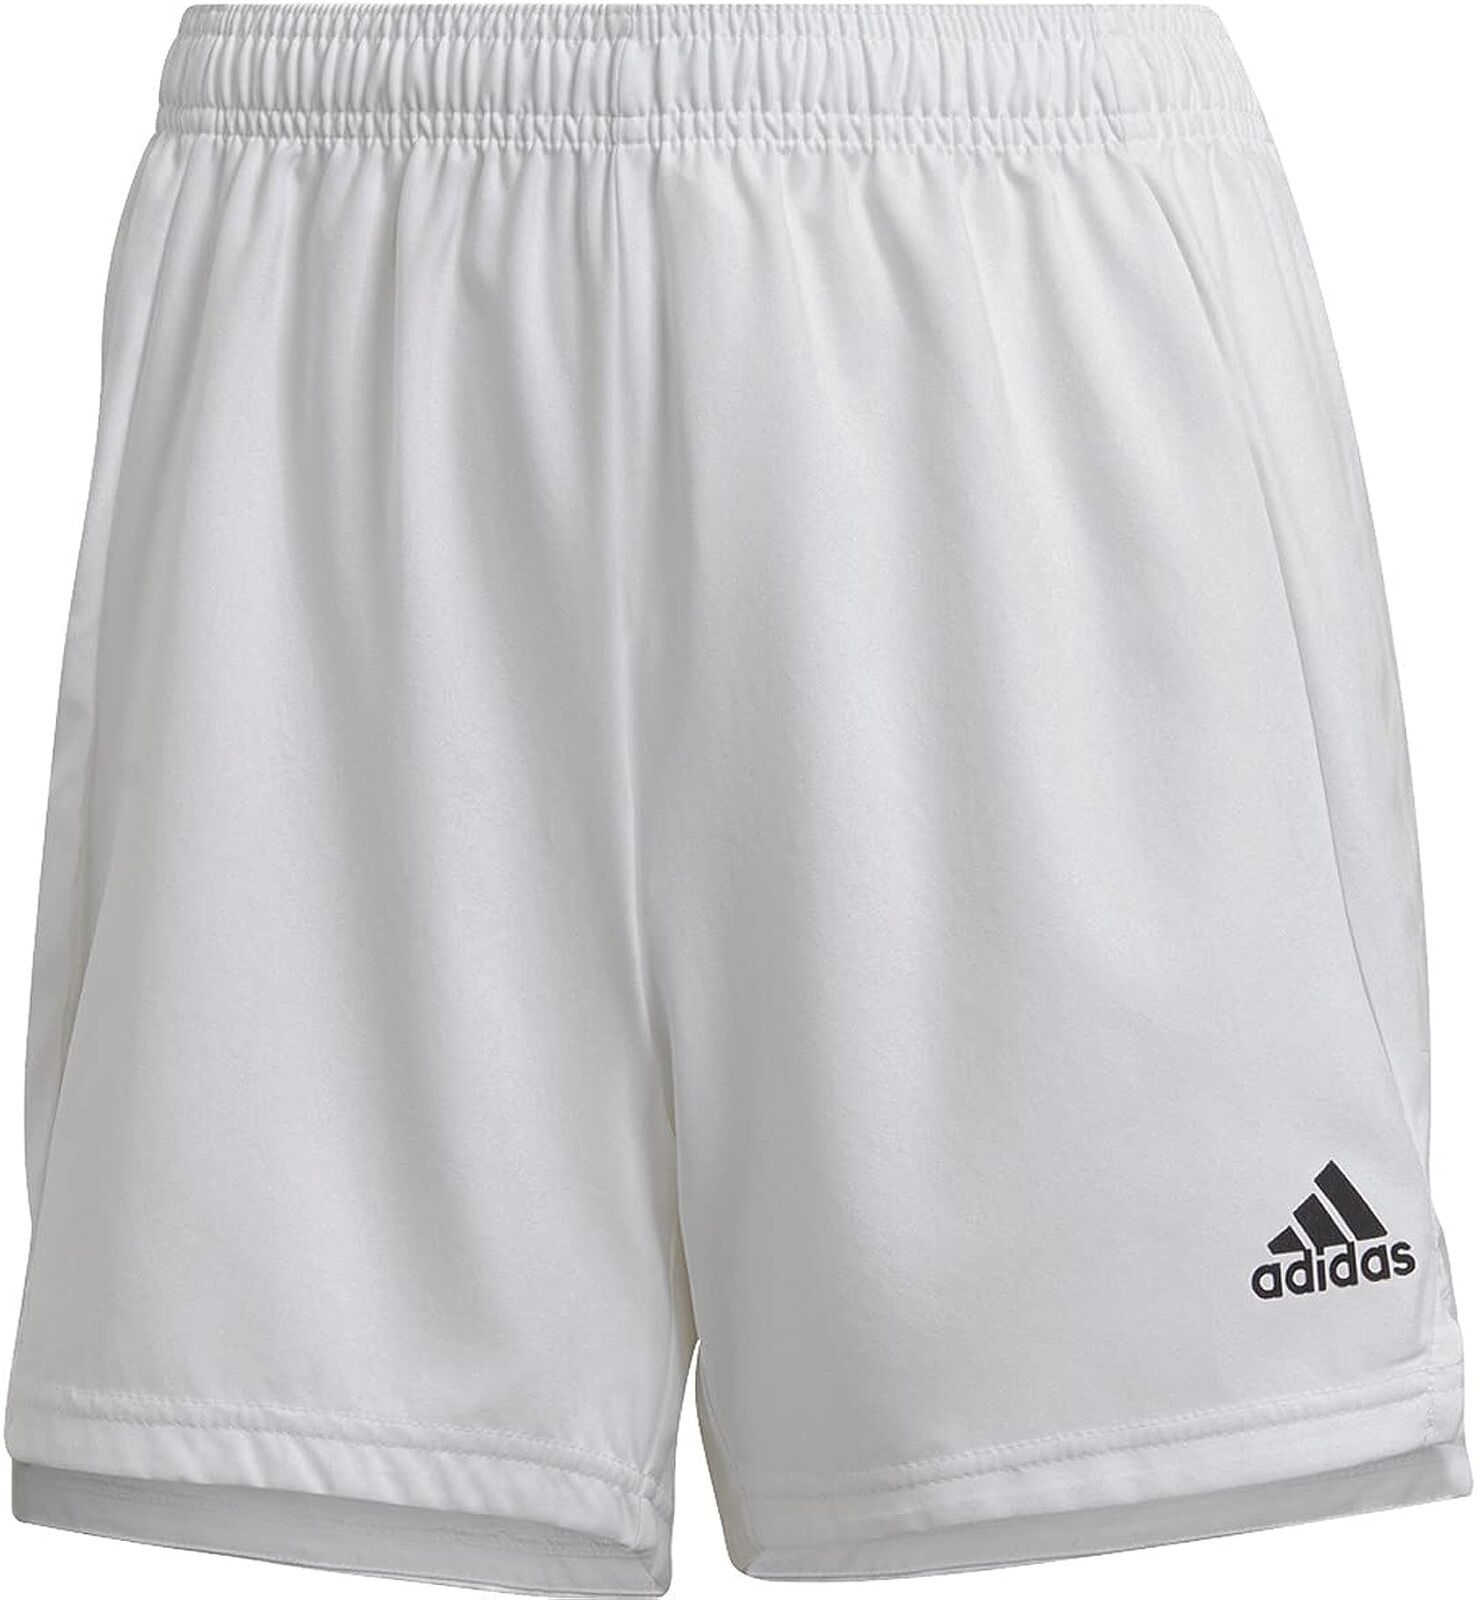 Primary image for adidas Womens Condivo 21 Shorts Size X-Large Color White/White